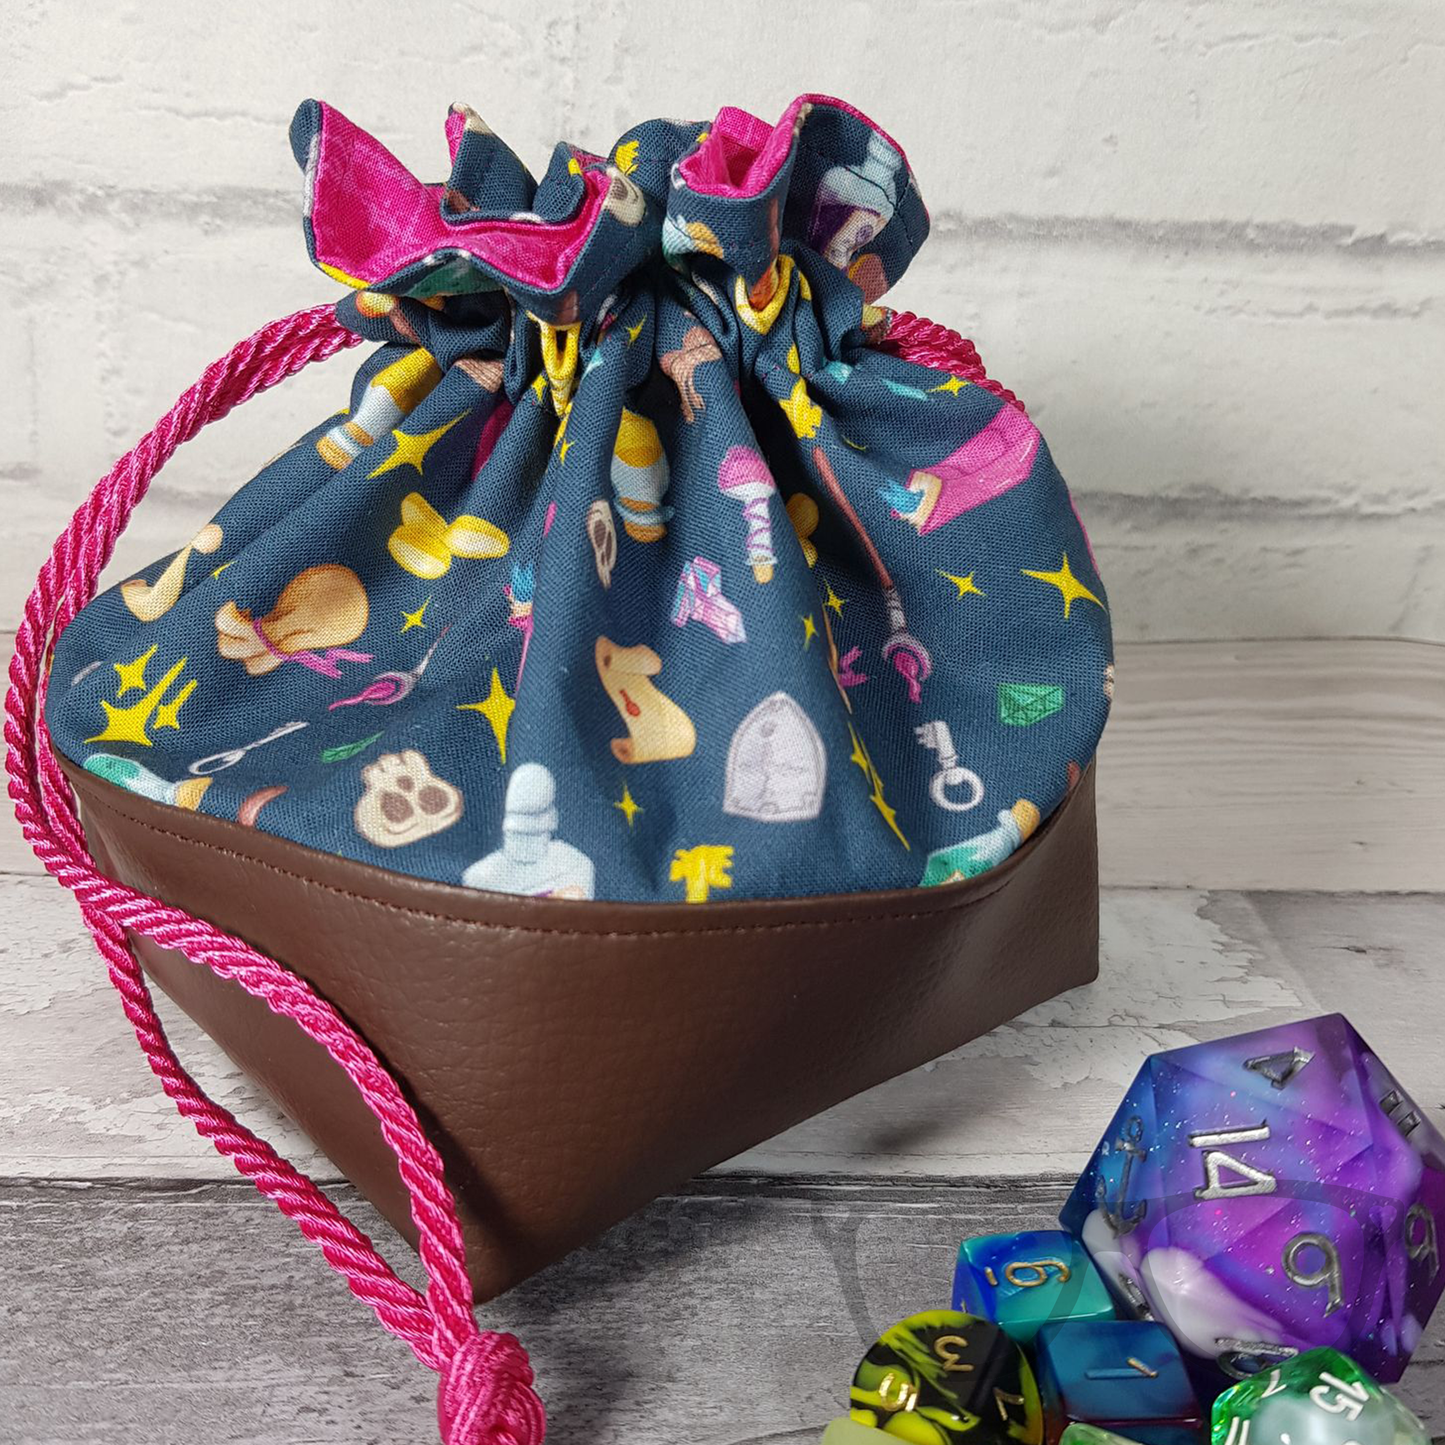 Teal and brown fabric dice bag with pink lining and cord